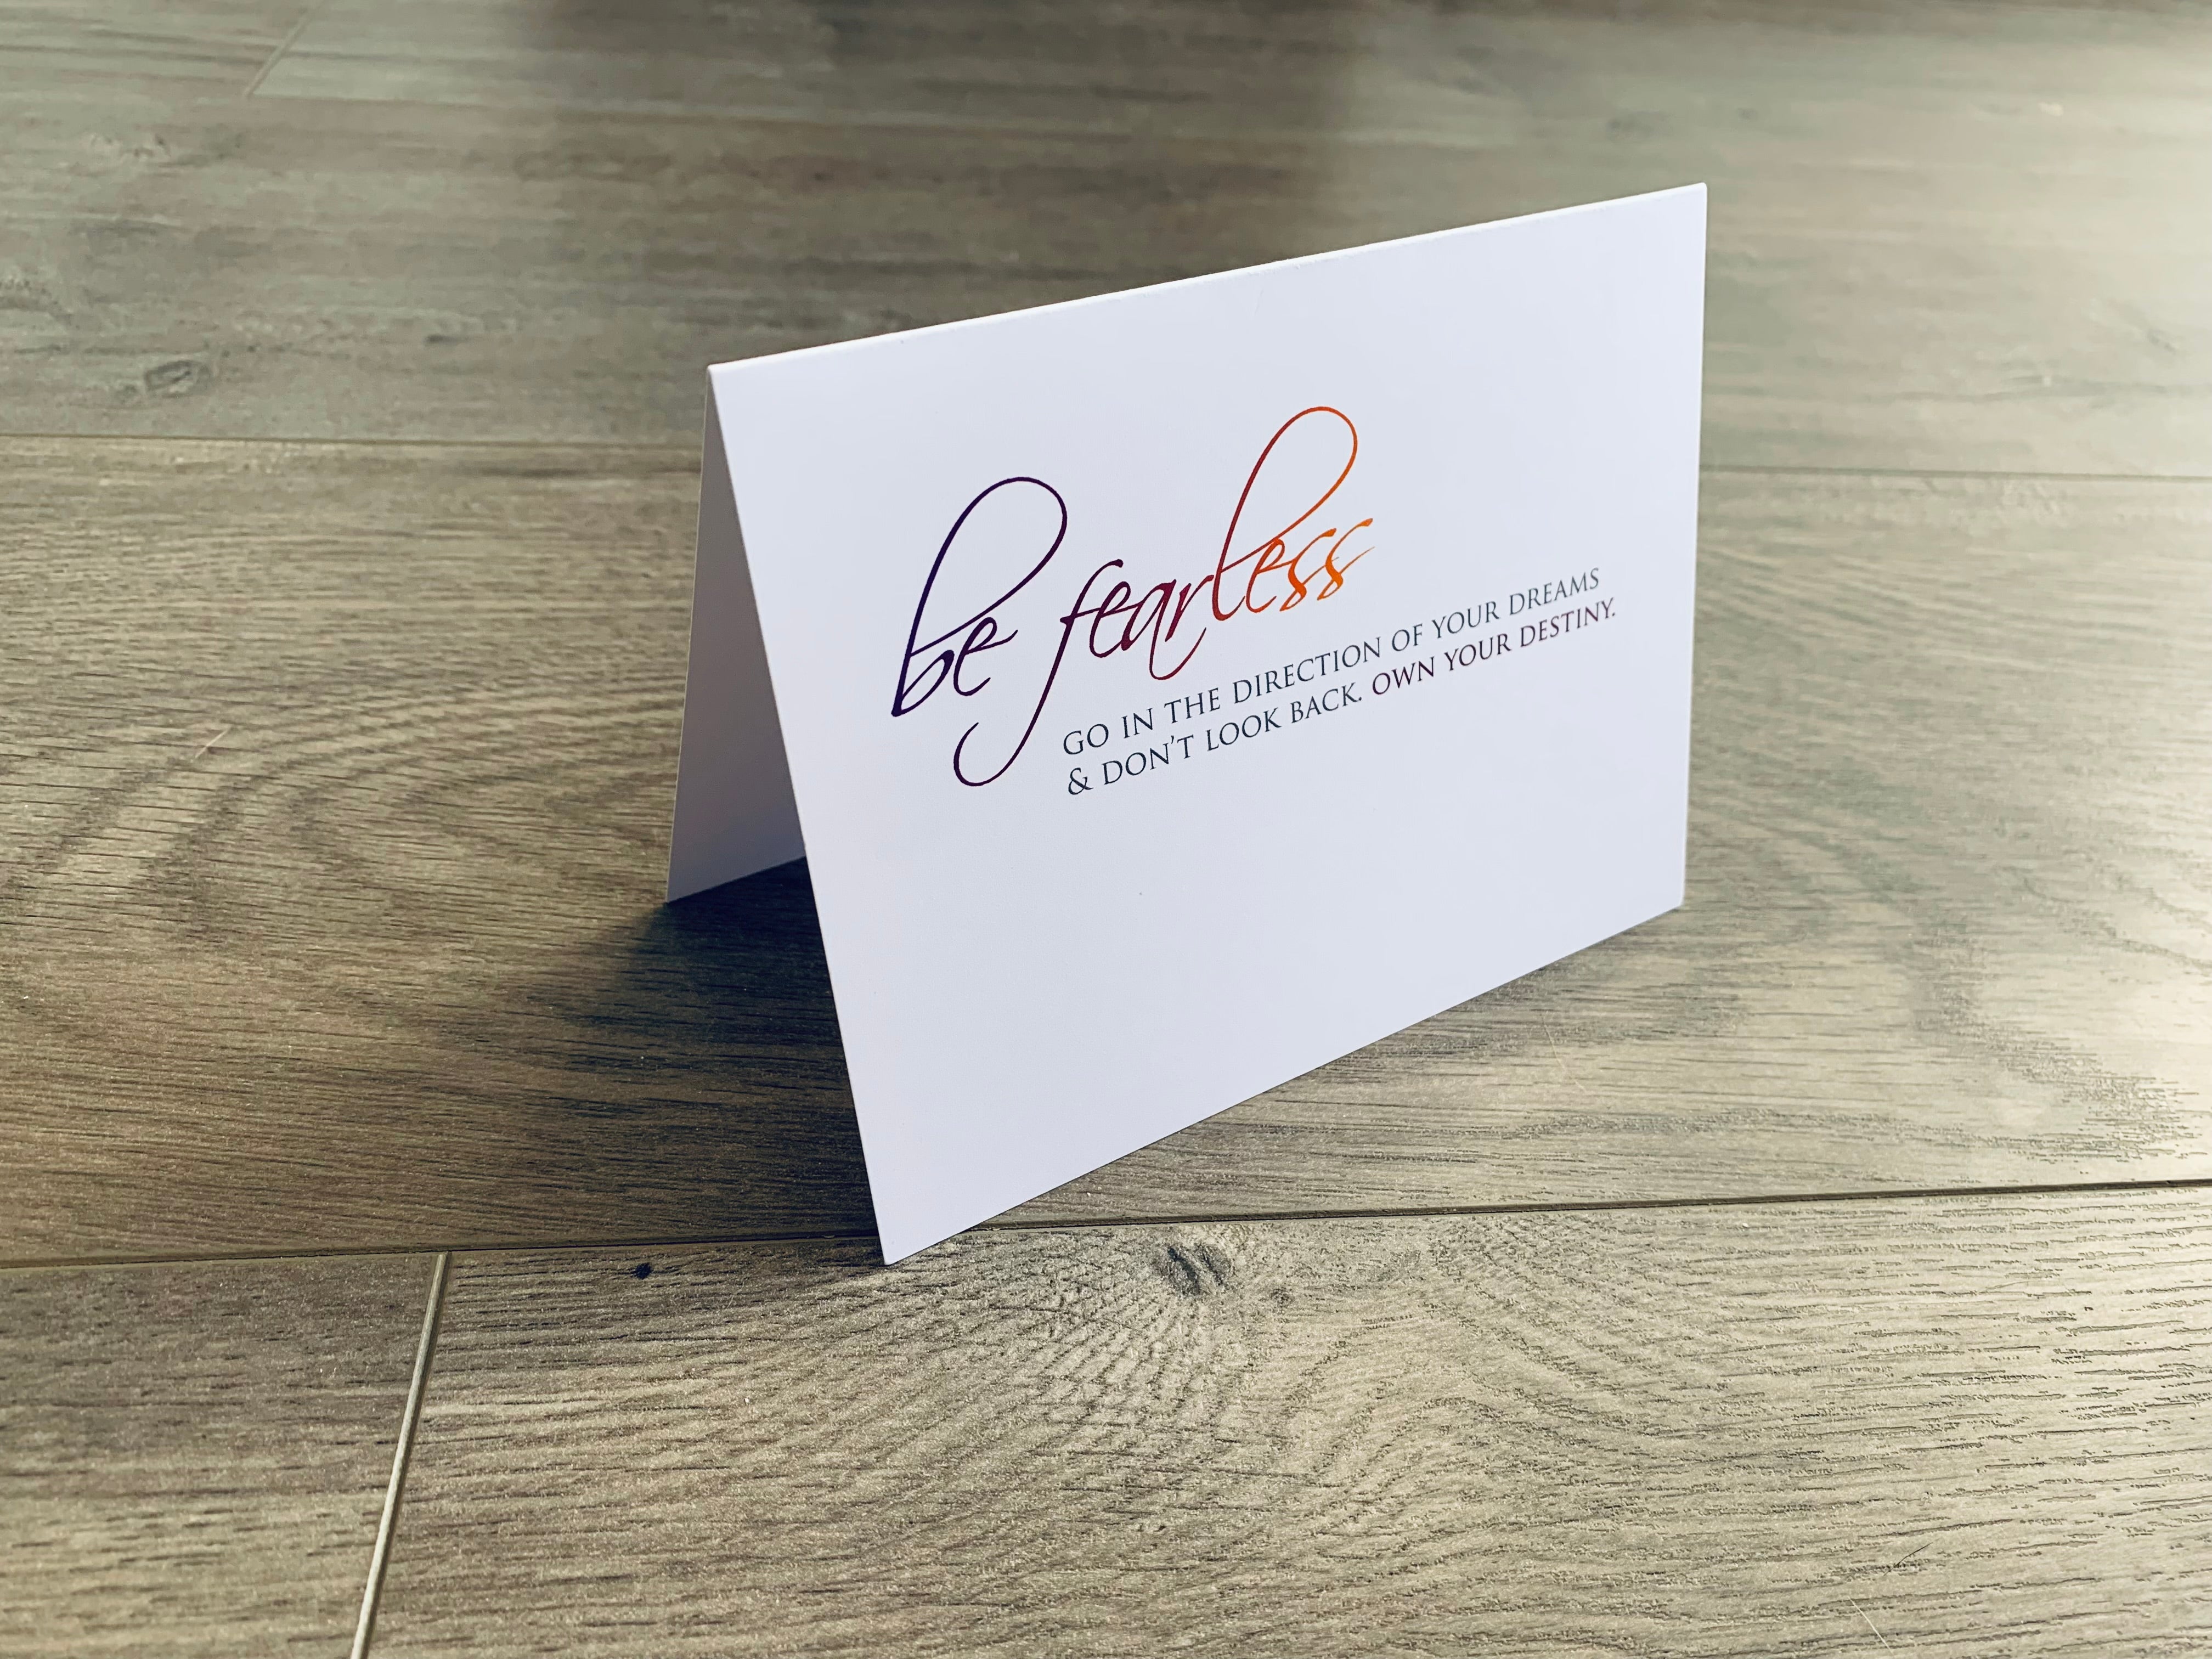 White folded notecard propped up on a wooden floor. The card reads "be fearless" in script font that fades from purple to orange. Below it is capitalized serif lettering that reads, "Go in the direction of your dreams and don't look back. Own your destiny." The card is from Stationare's Inspire collection.